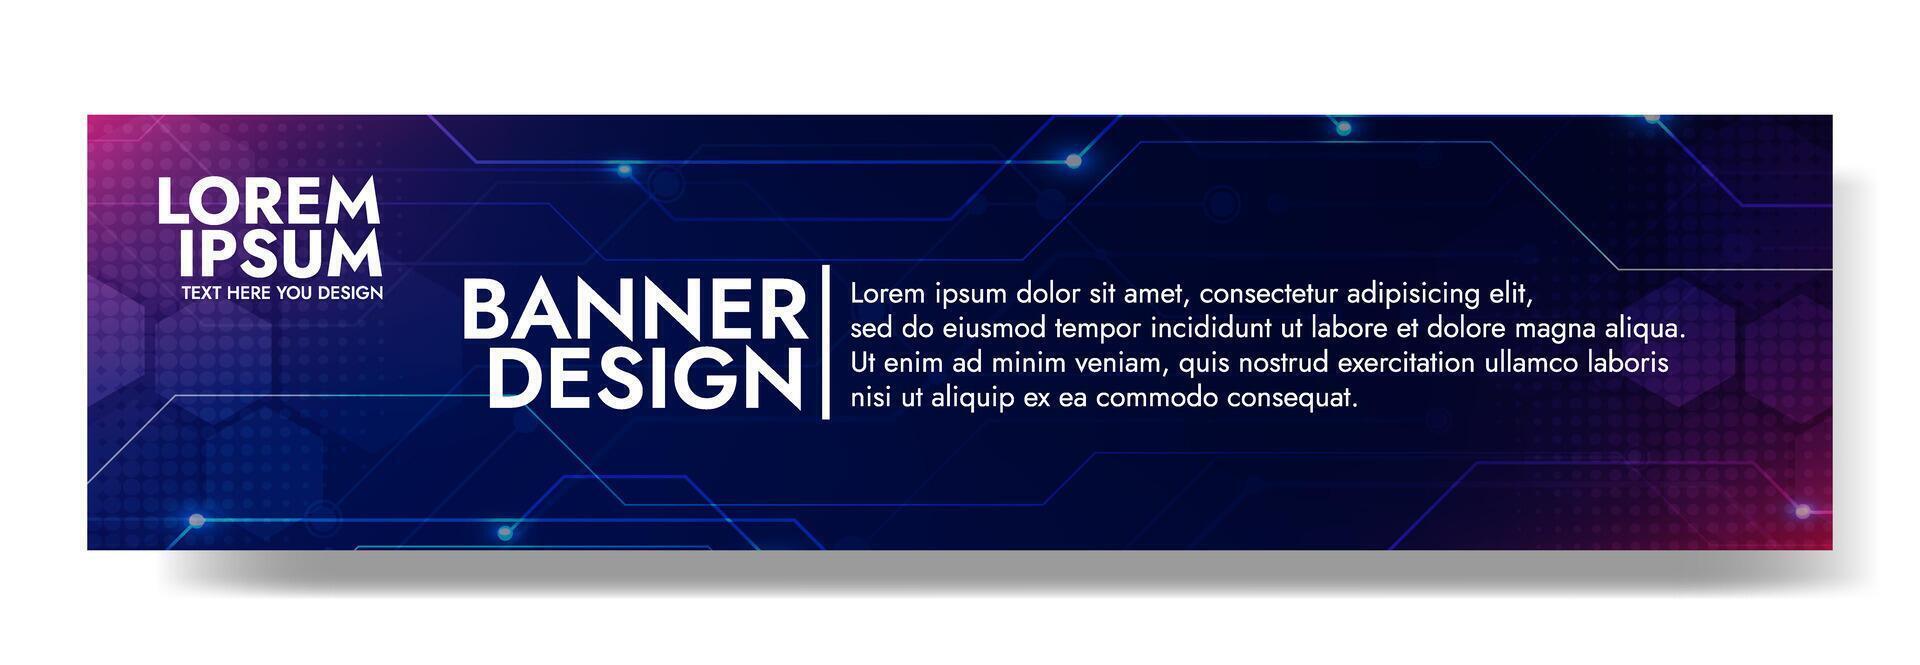 violet Blue Digital technology banner. Futuristic banner for various design projects such as websites, presentations, print materials, social media posts vector